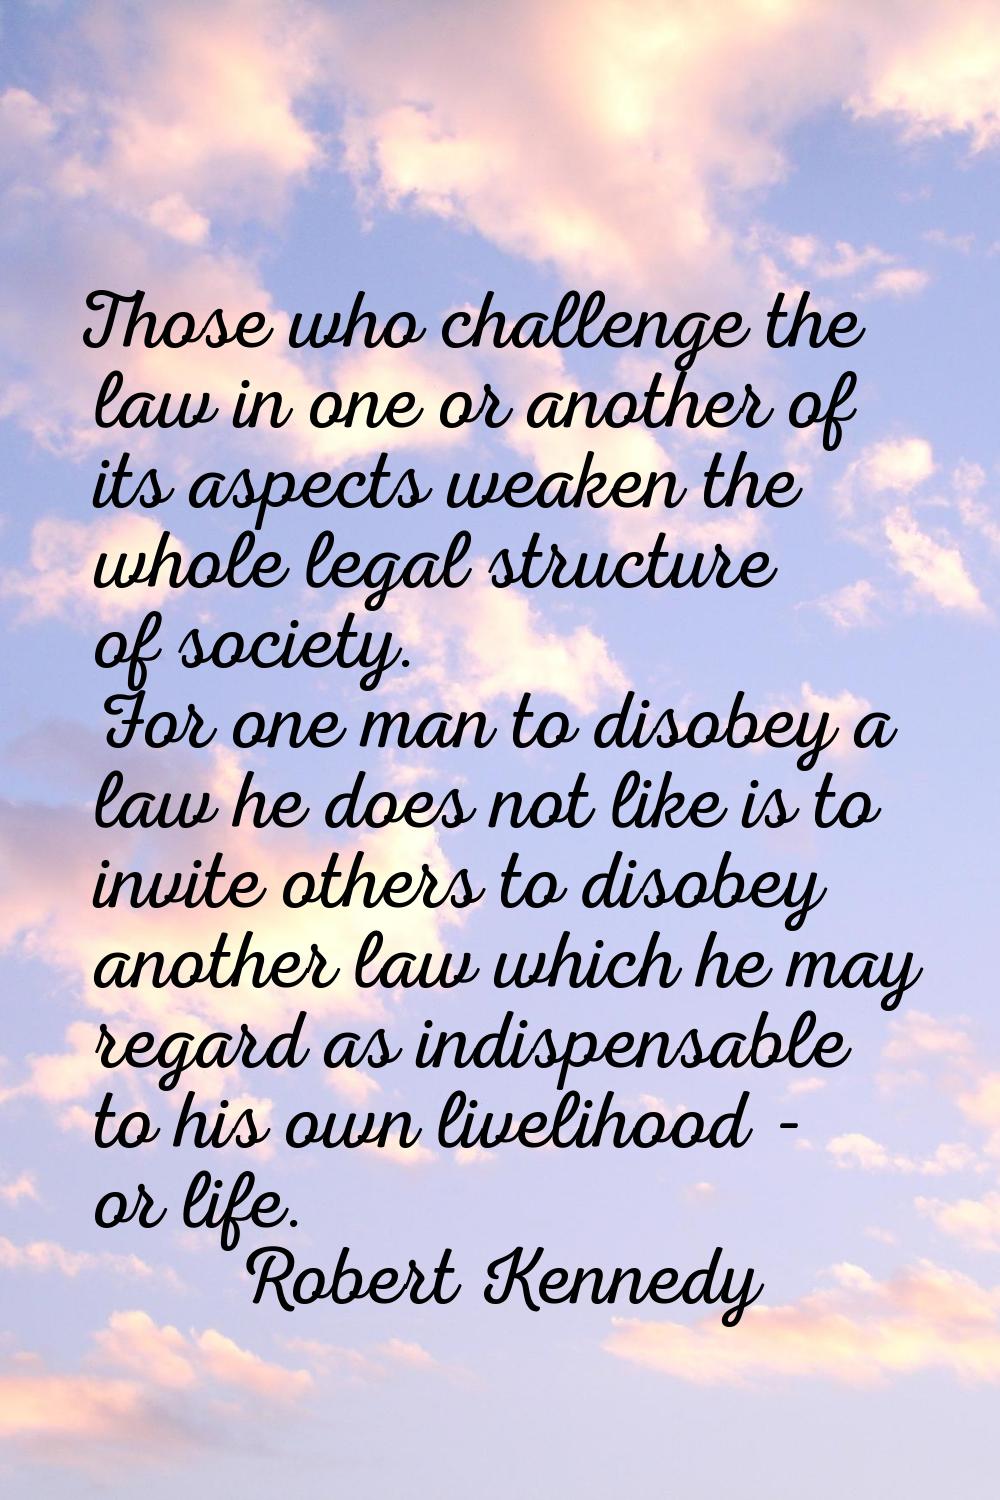 Those who challenge the law in one or another of its aspects weaken the whole legal structure of so